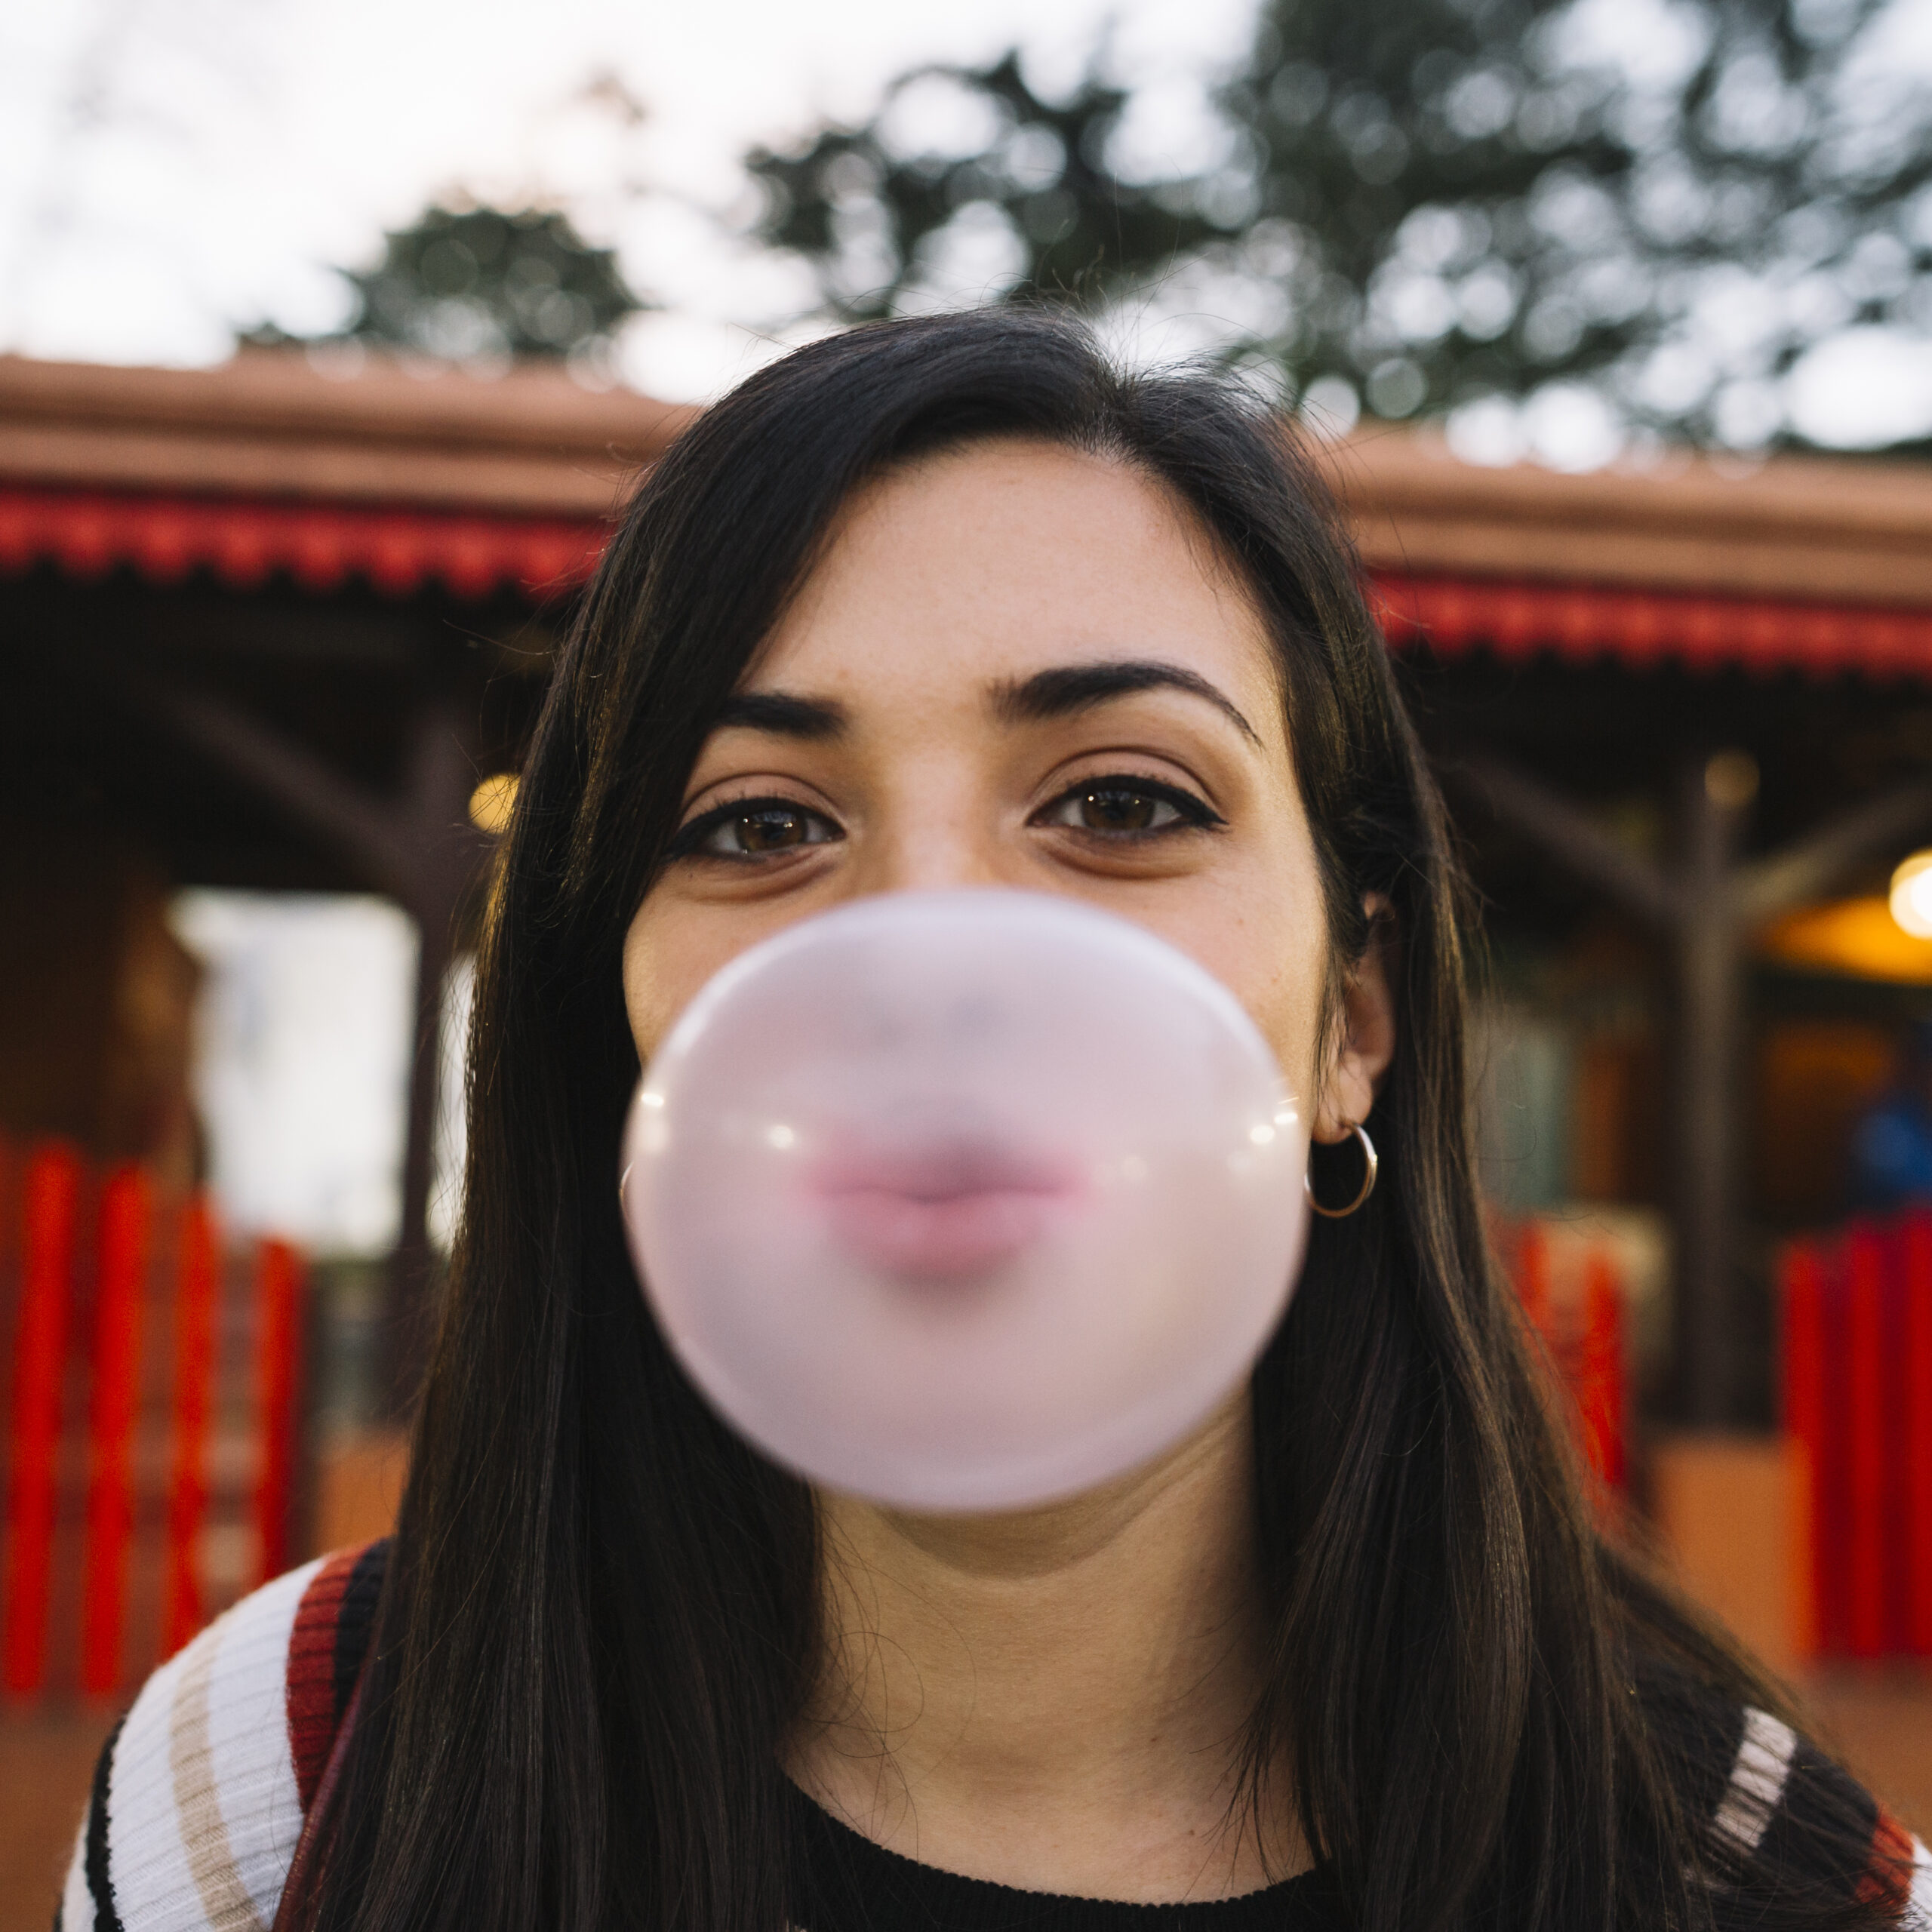 Does chewing gum clean your teeth?